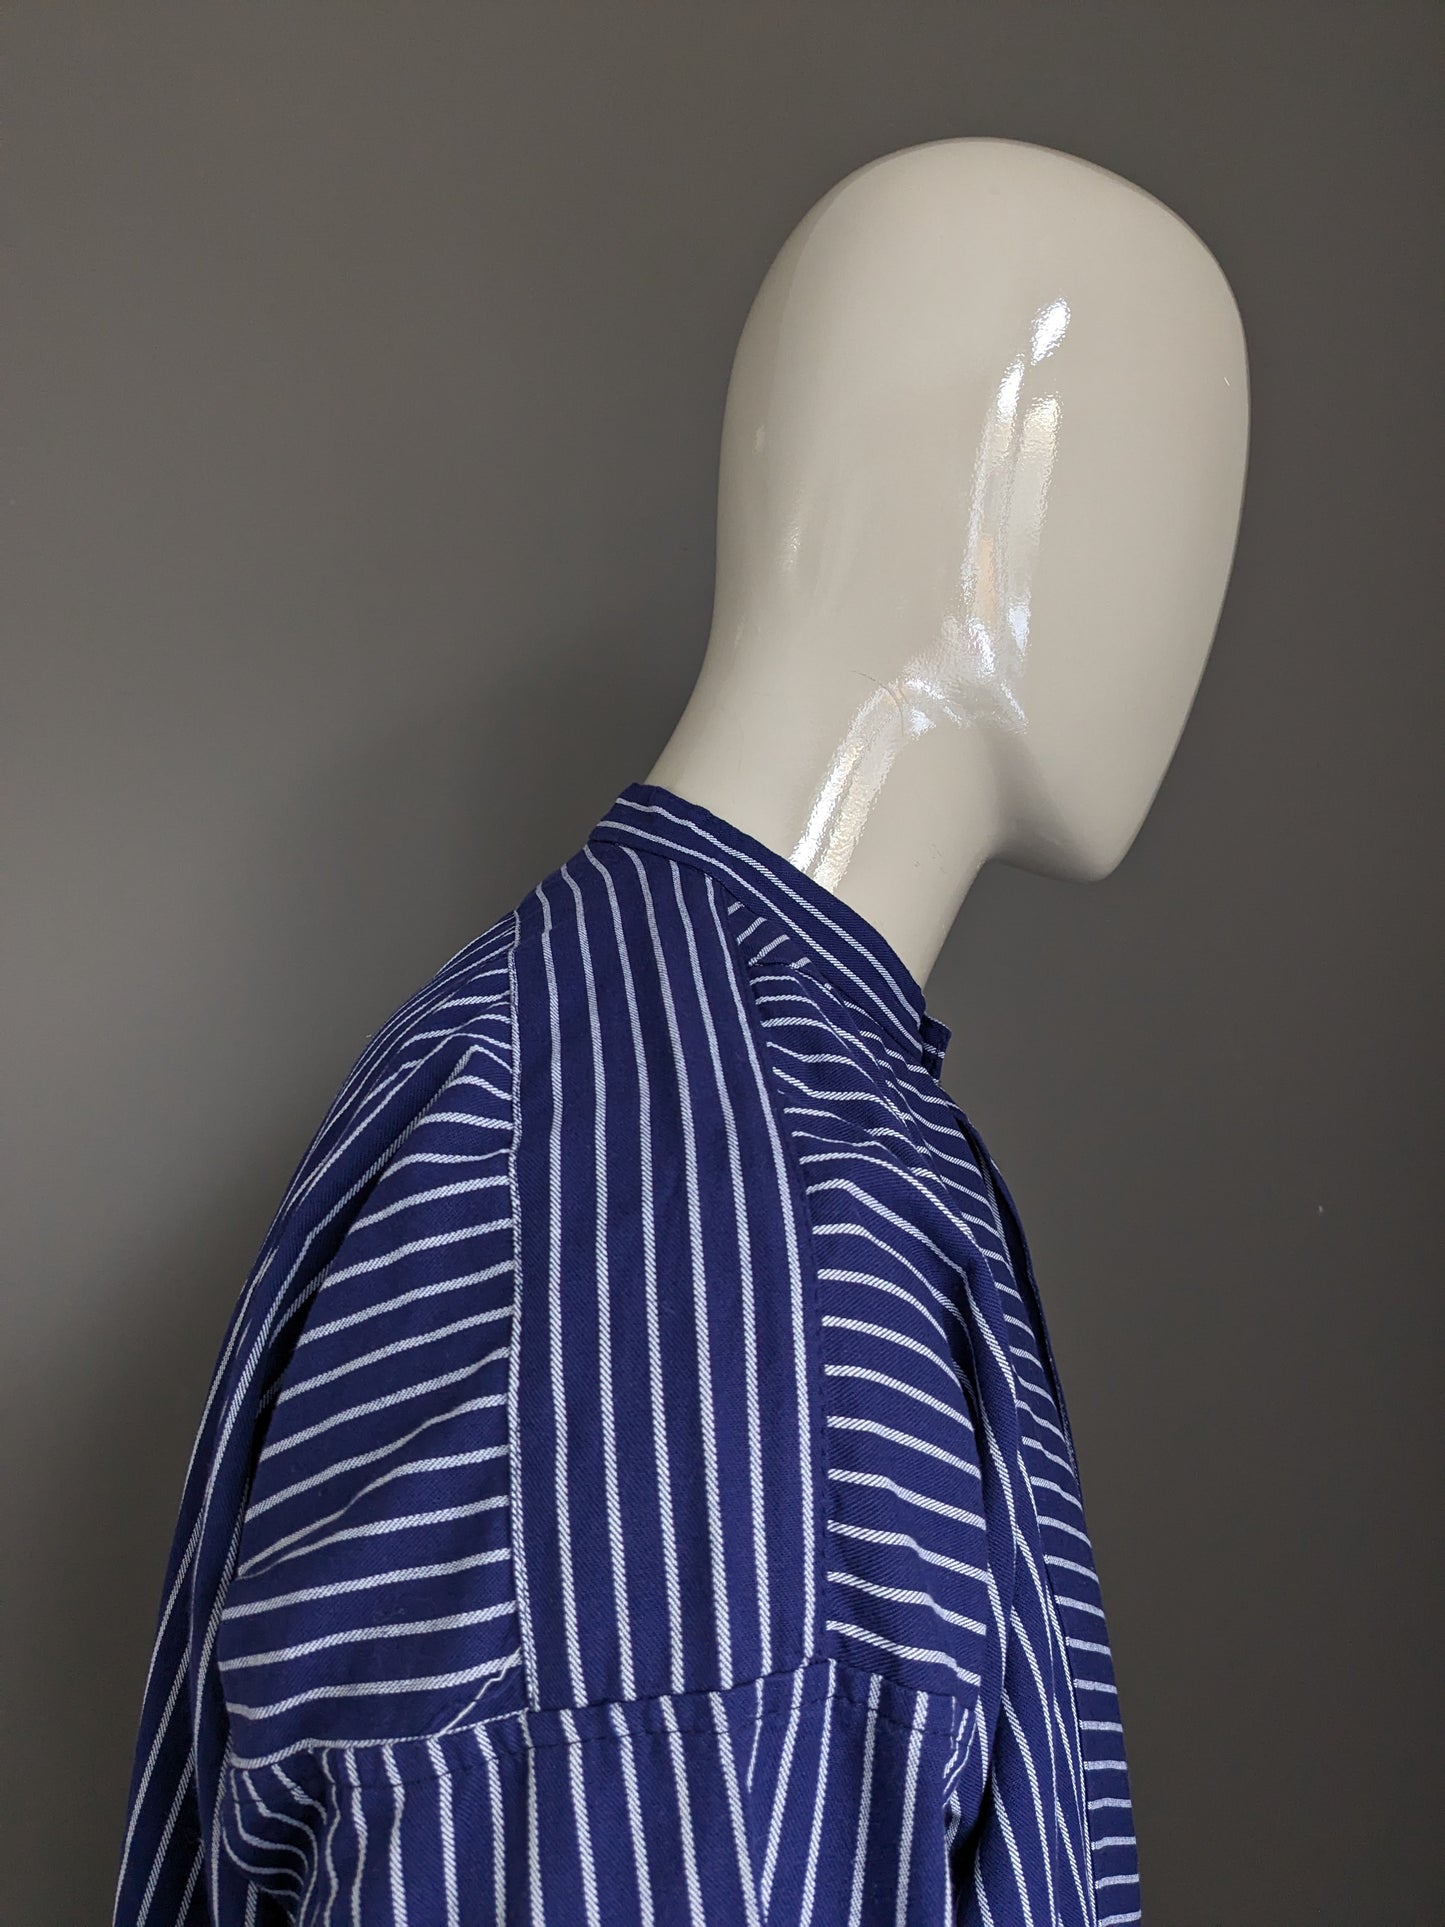 Vintage Duster polo sweater / shirt with raised / farmers / mao collar. Blue white striped. Size XXL / 2XL